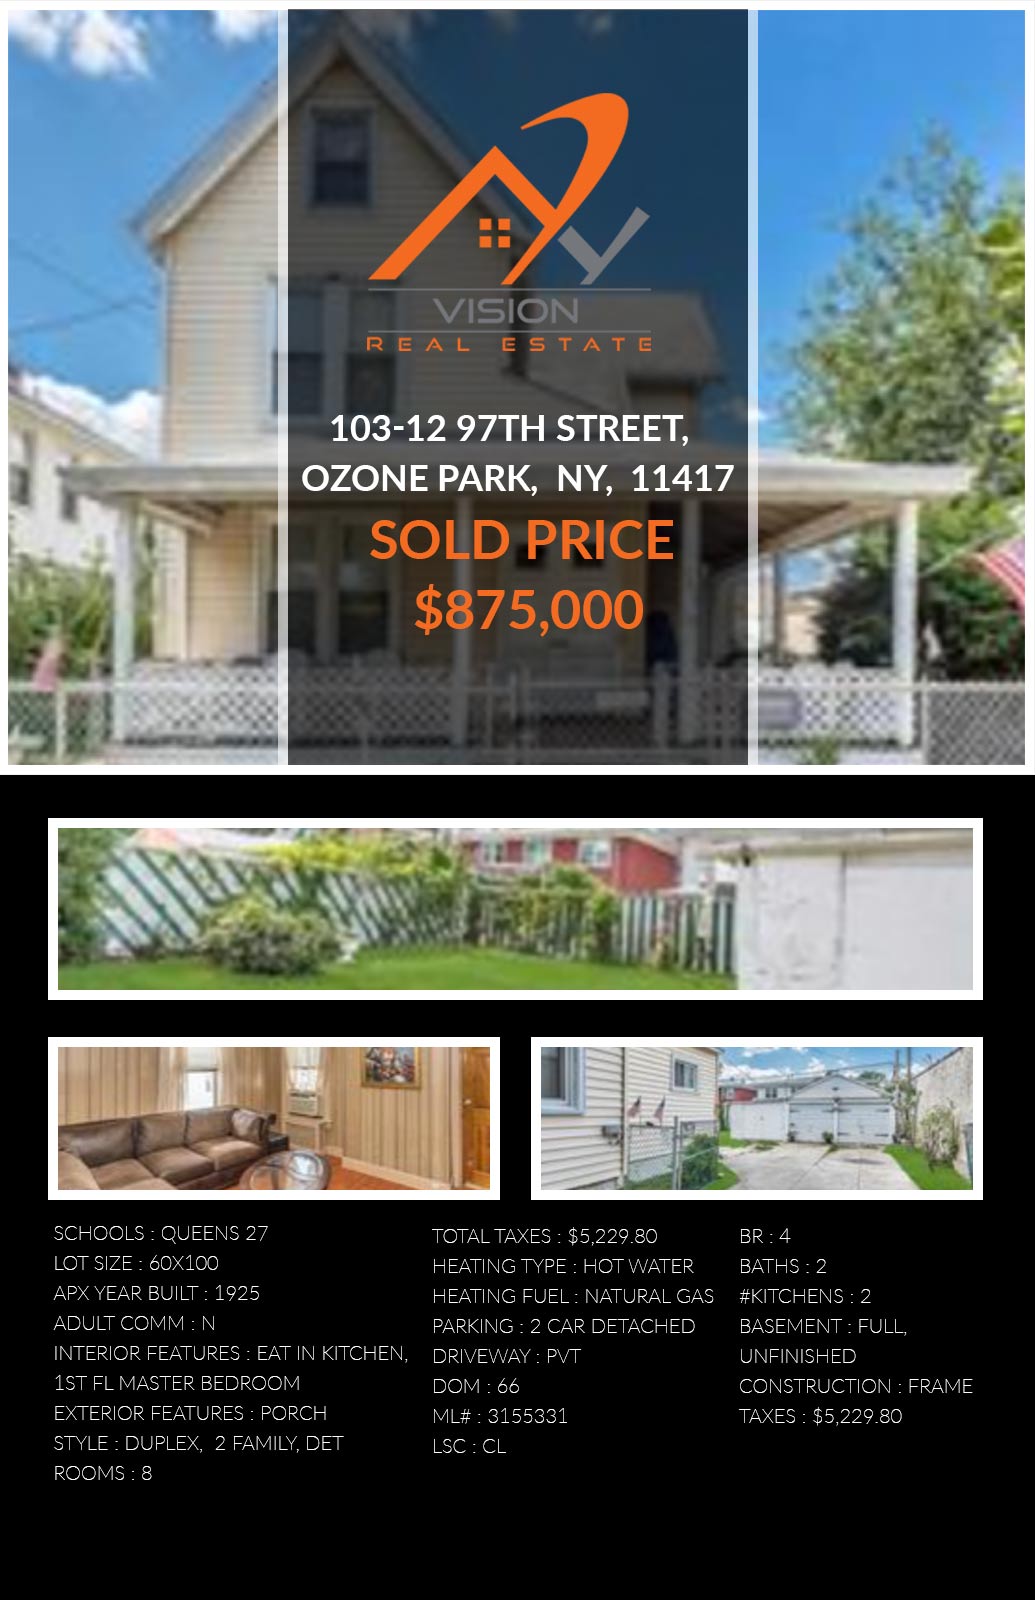 Residential Property For Ozone Park, NY